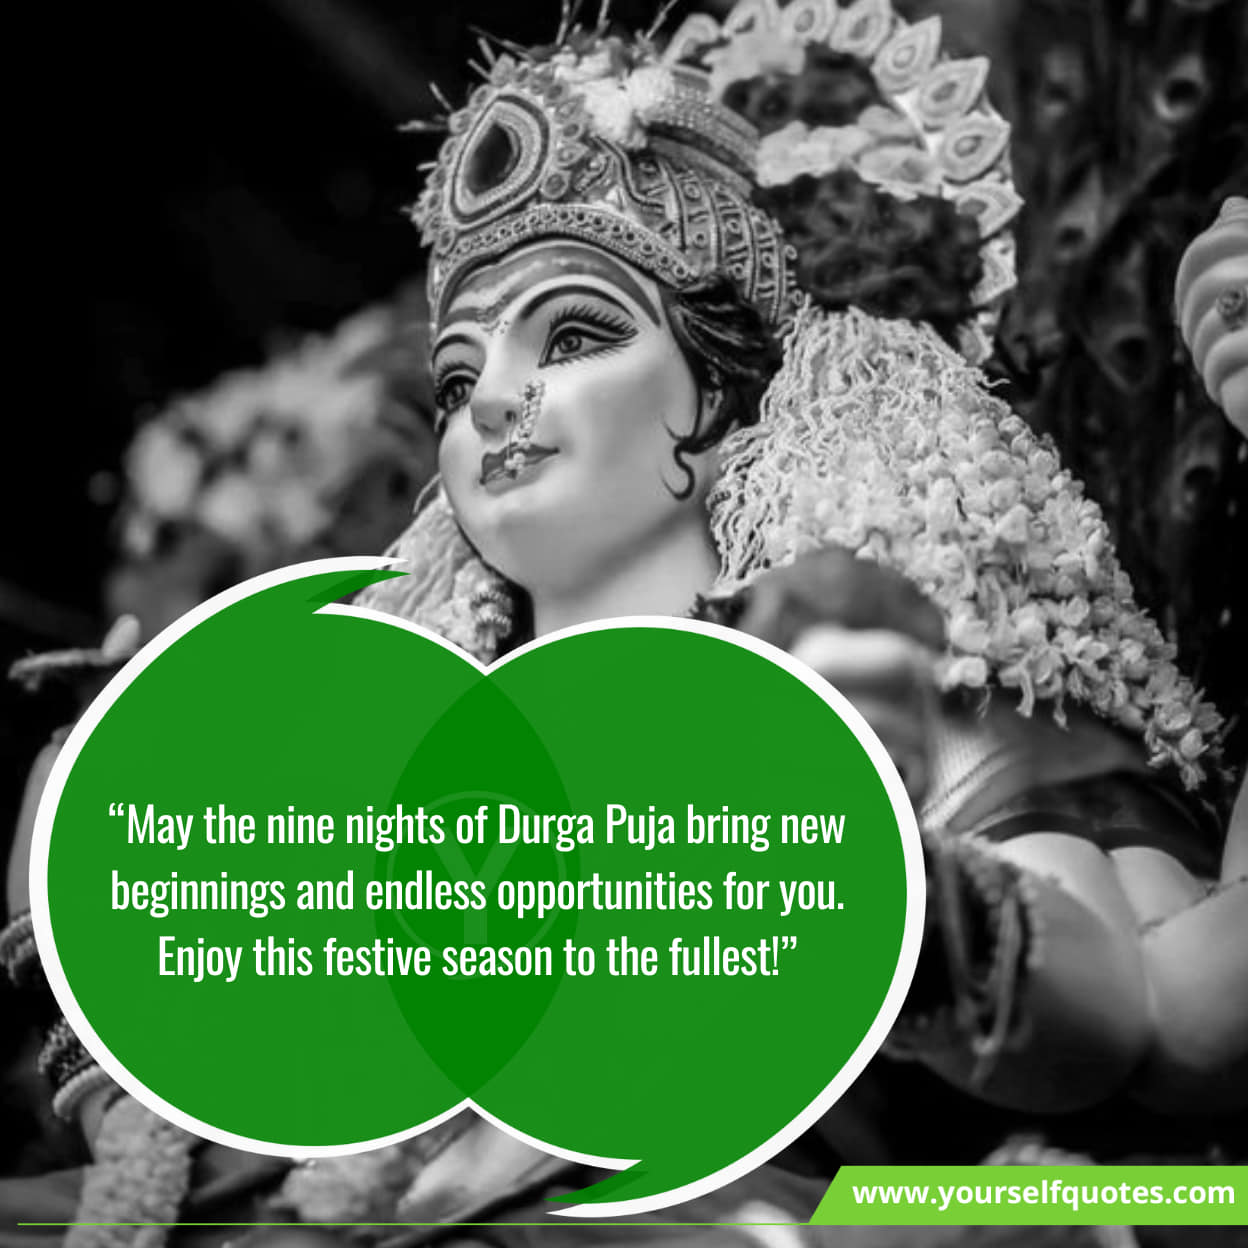 Durga Puja blessings and good wishes